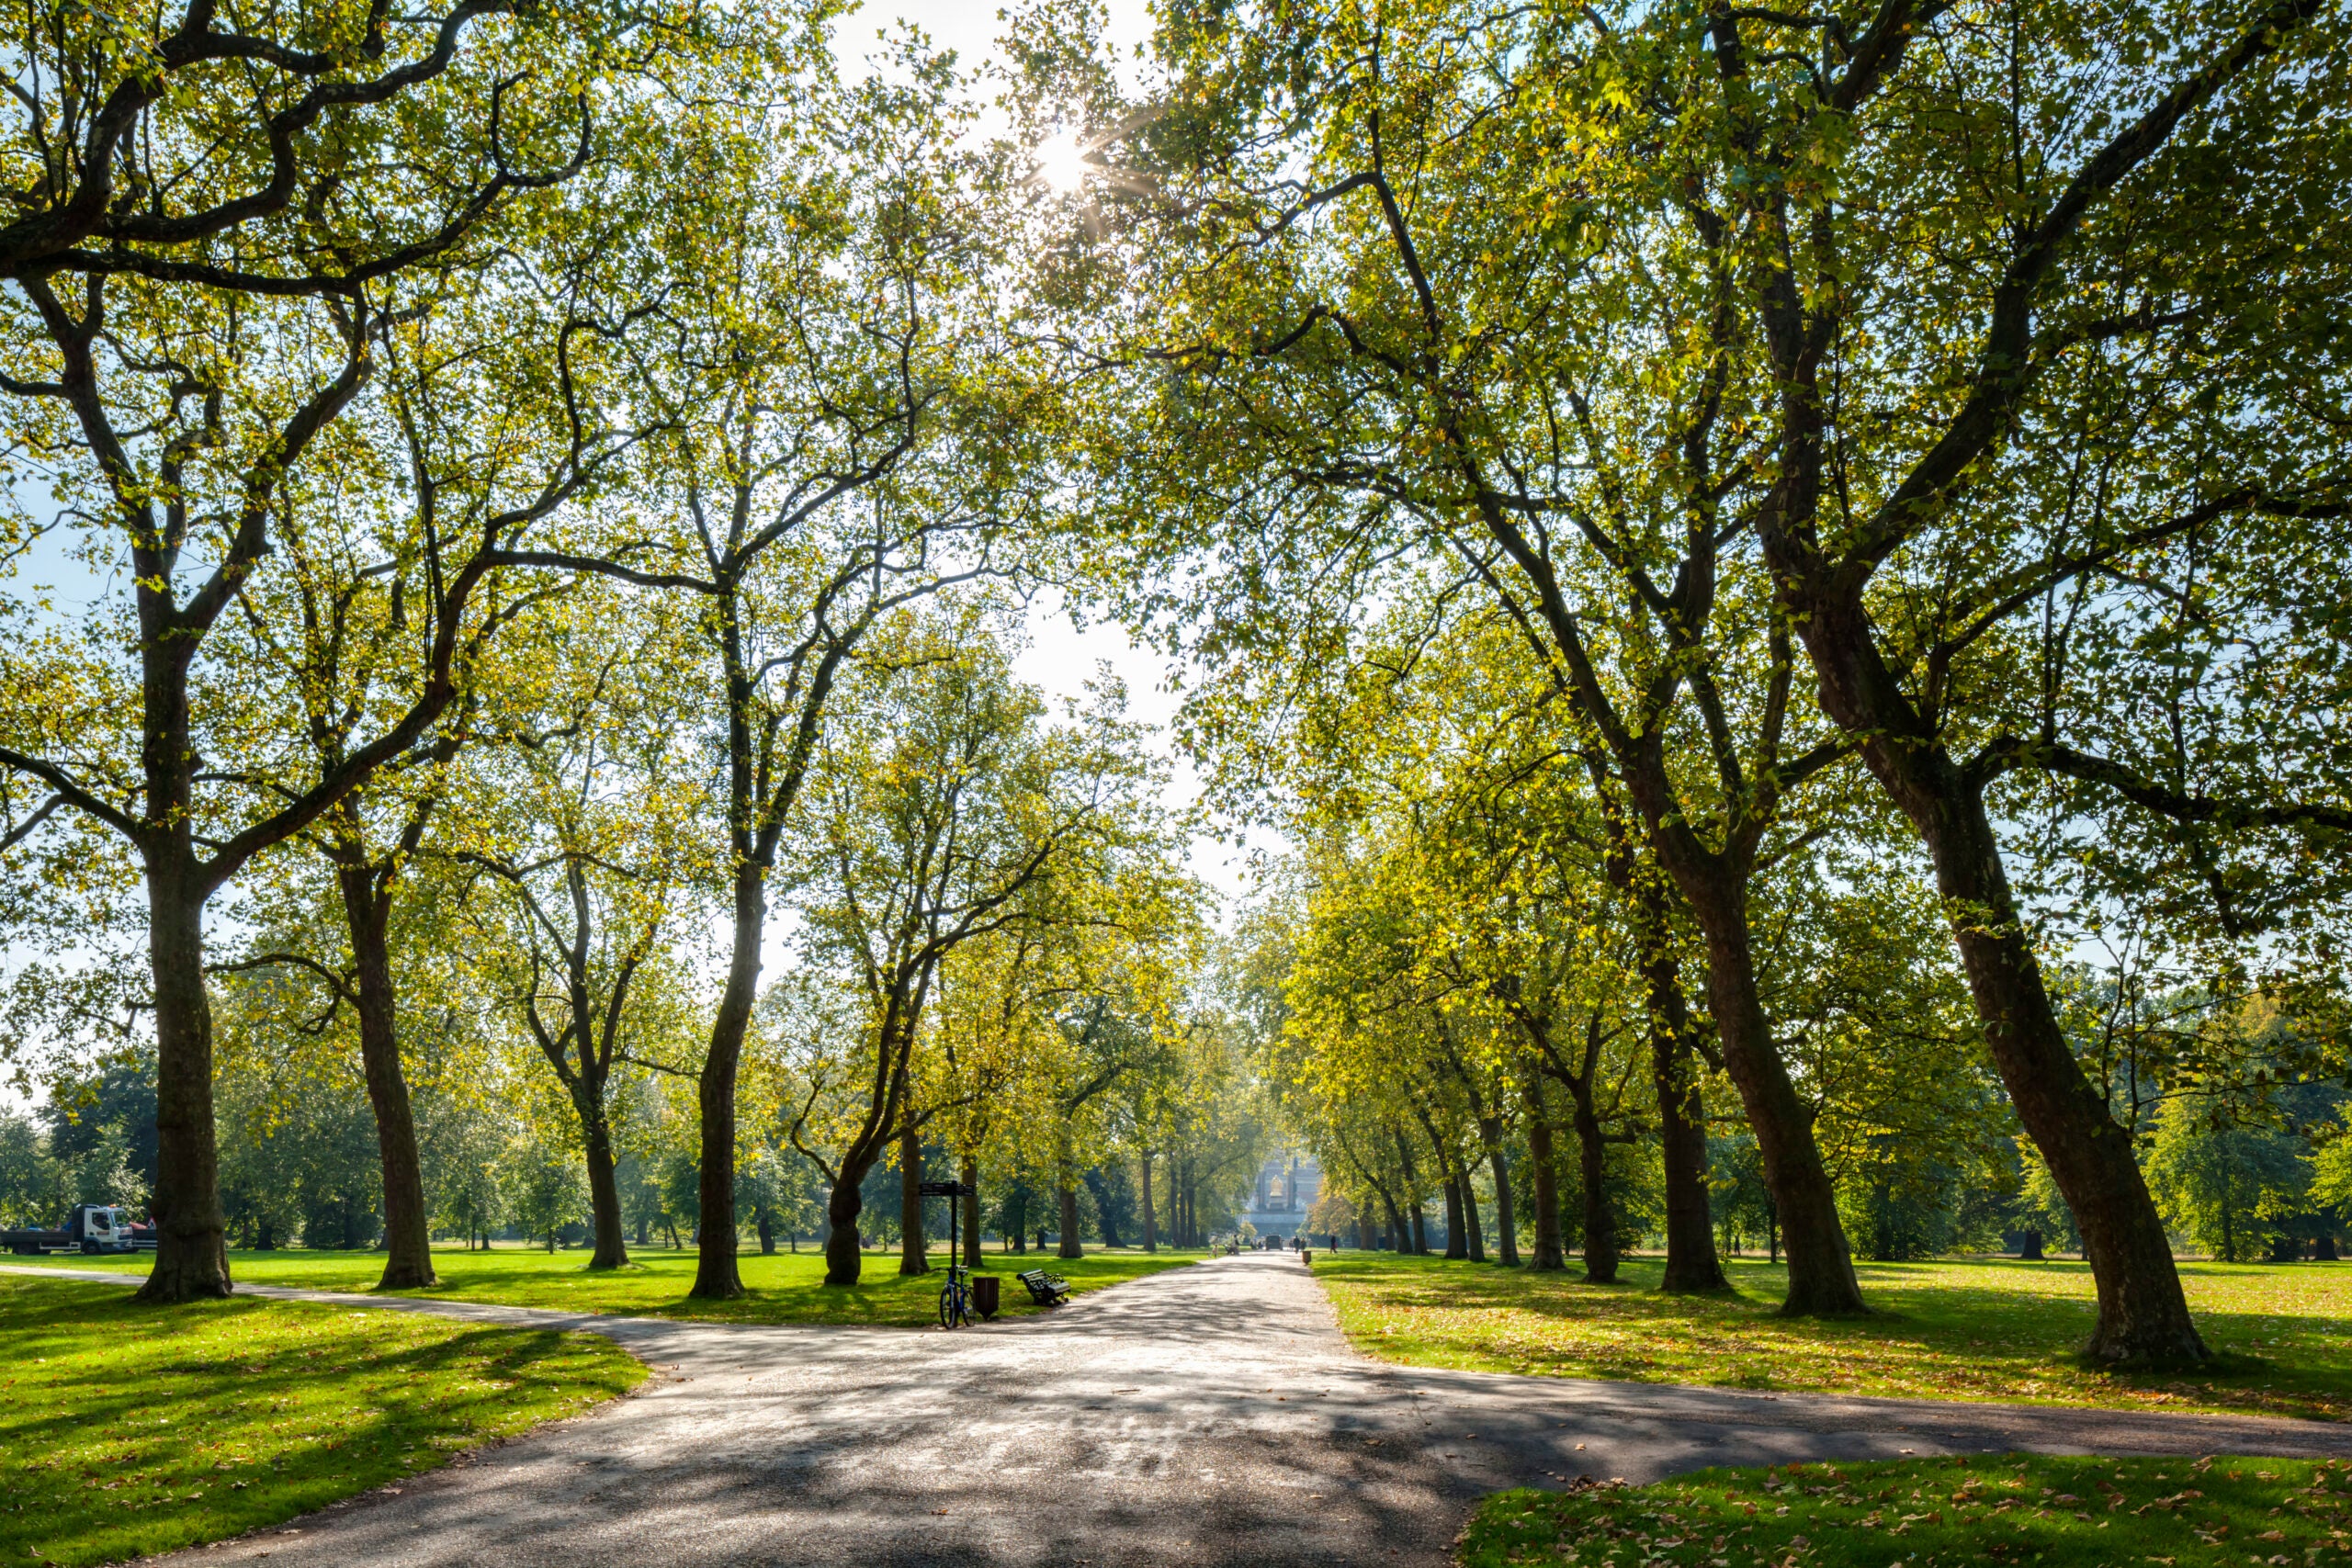 Hyde Park is one of London's many green spaces